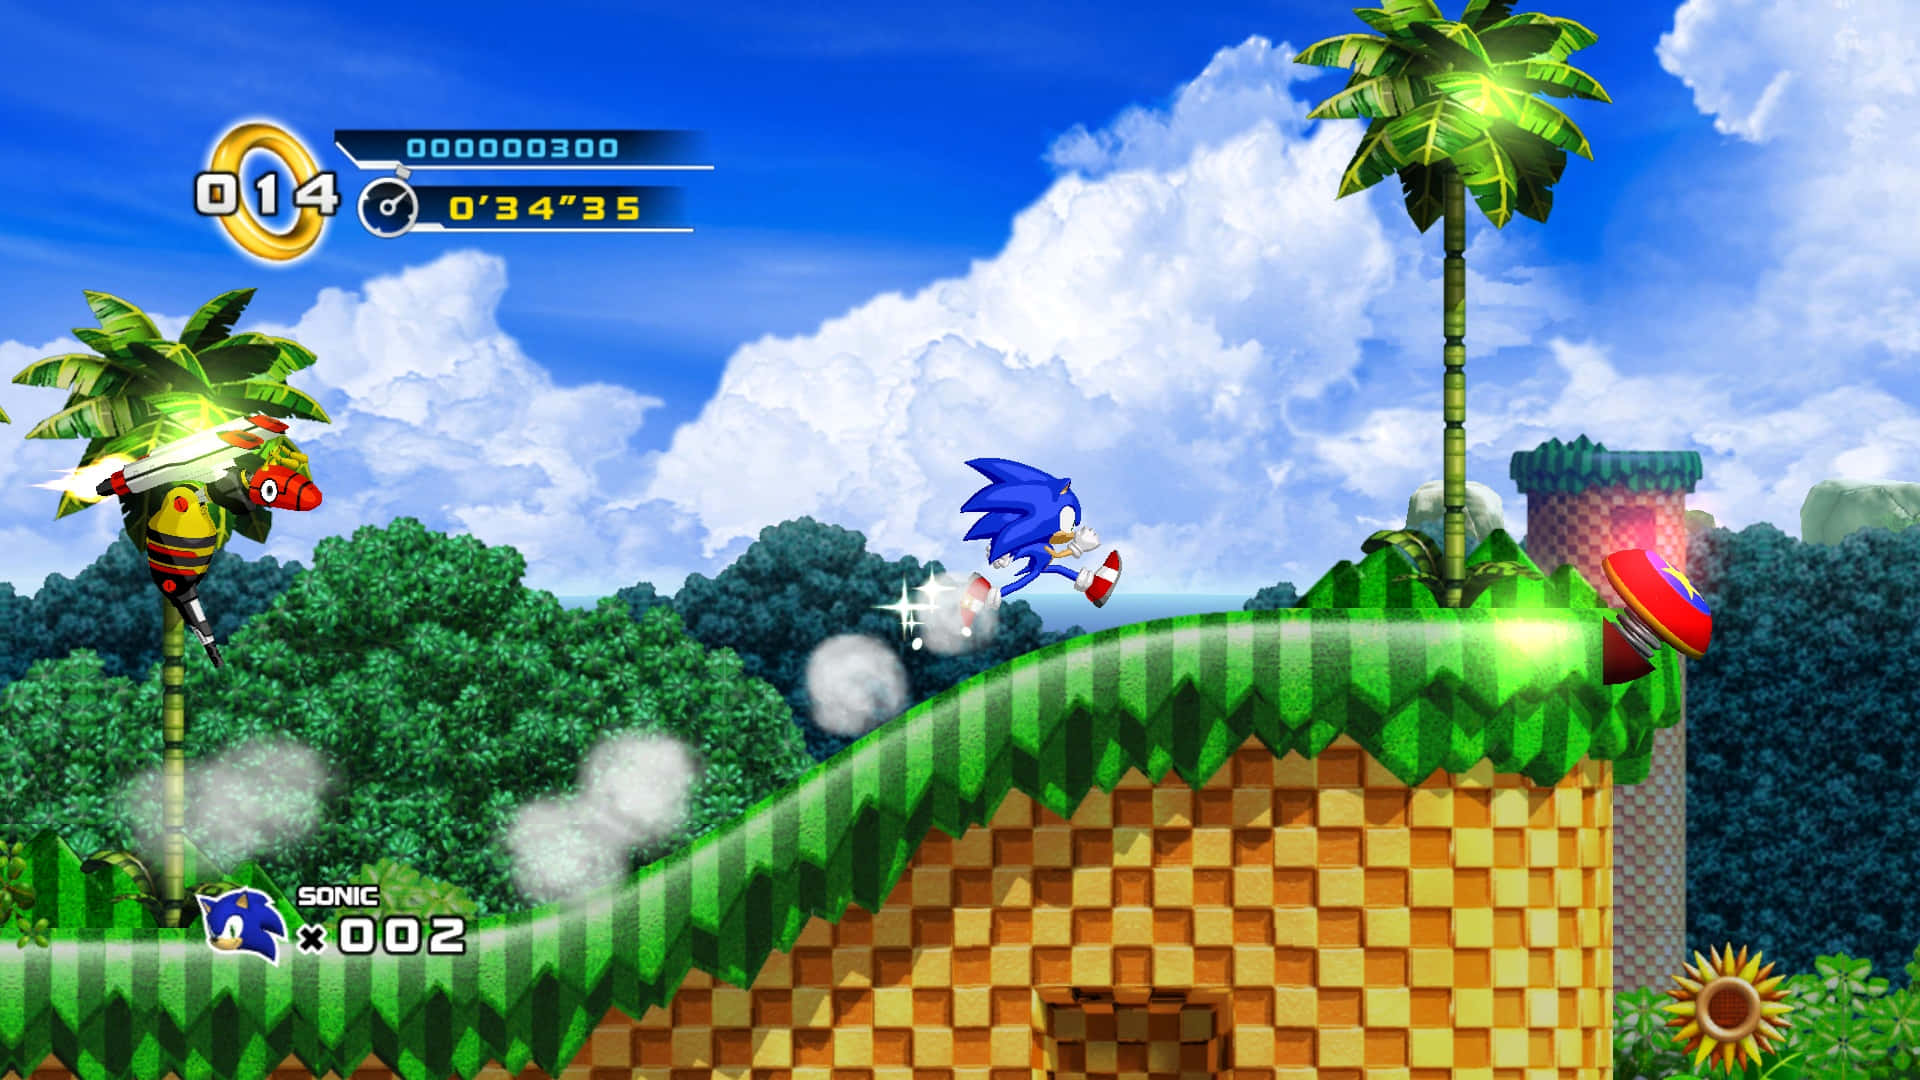 Sonic The Hedgehog travels through Greenhill Zone